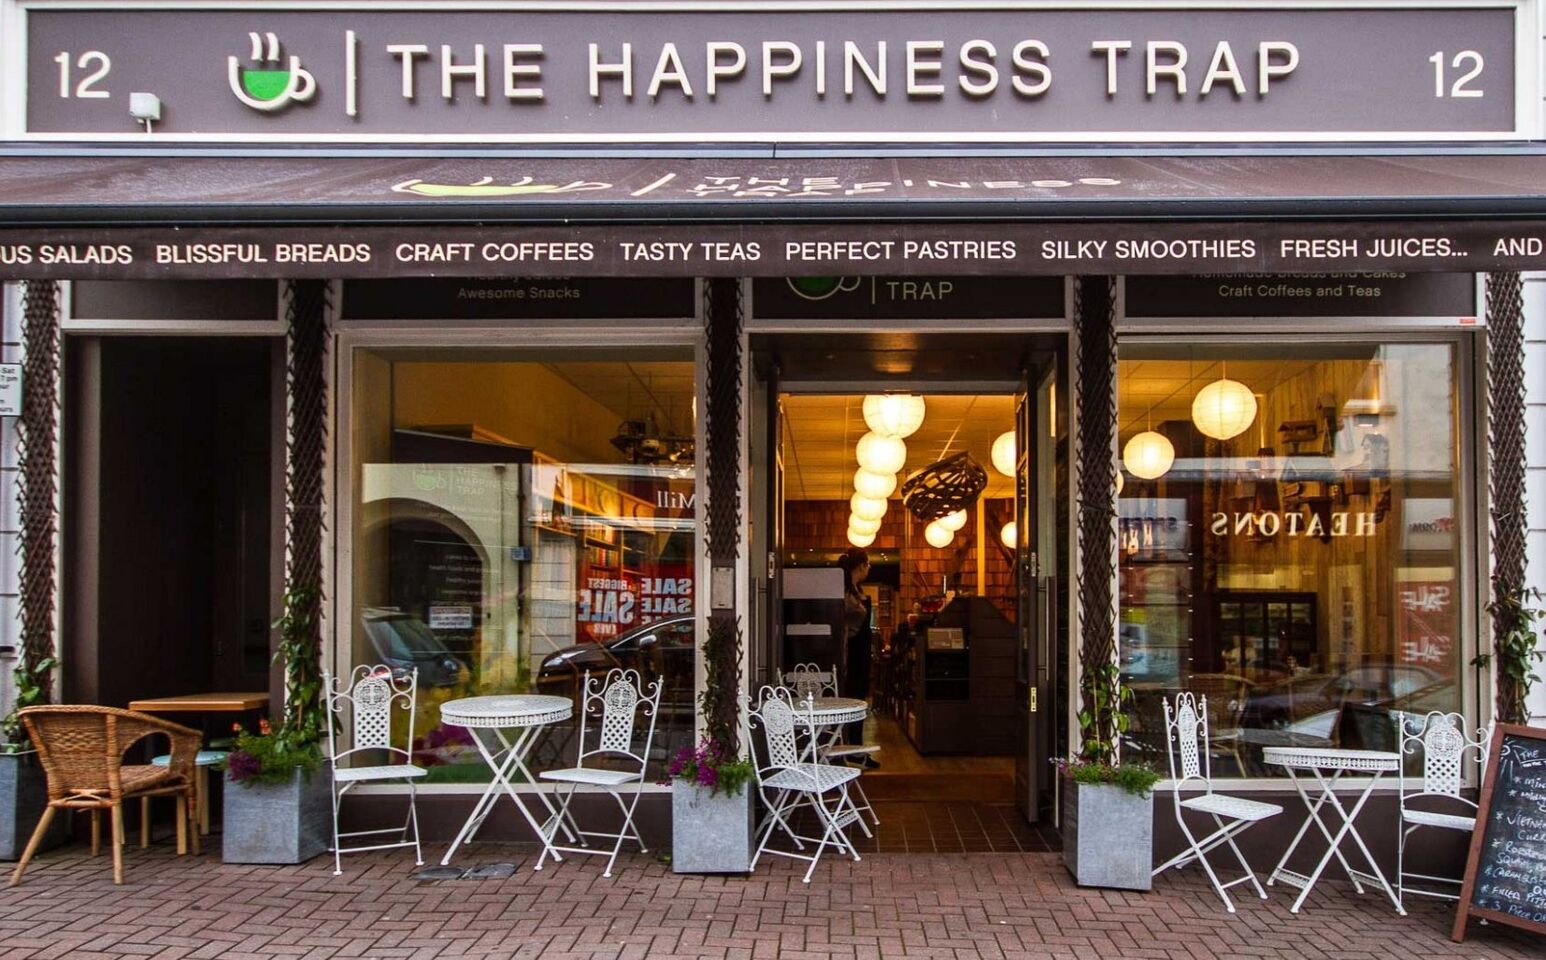 A photo of The Happiness Trap